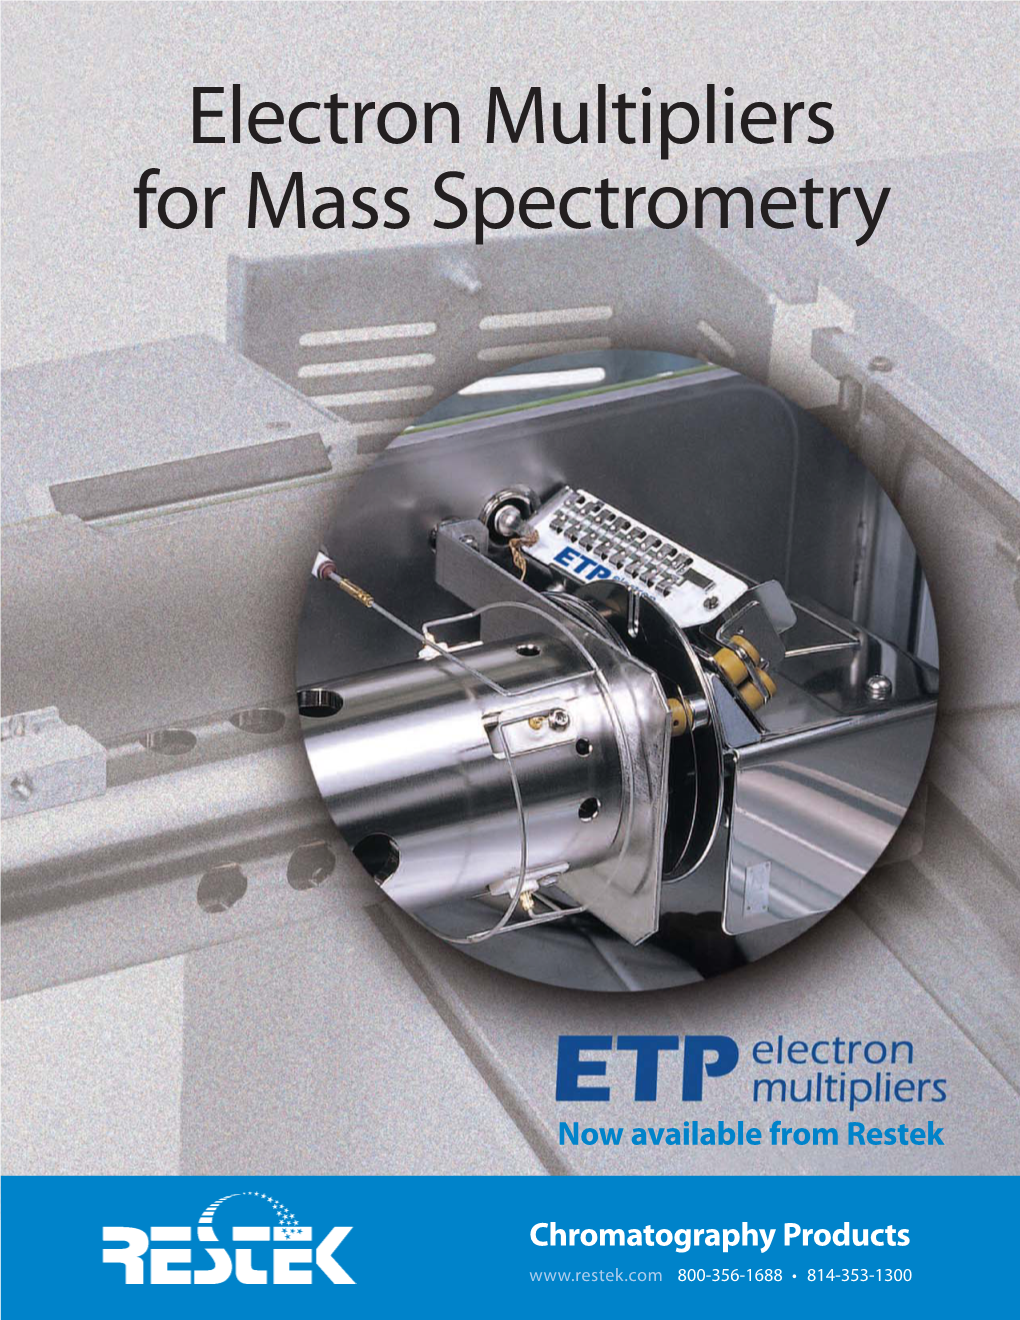 Electron Multipliers for Mass Spectrometry